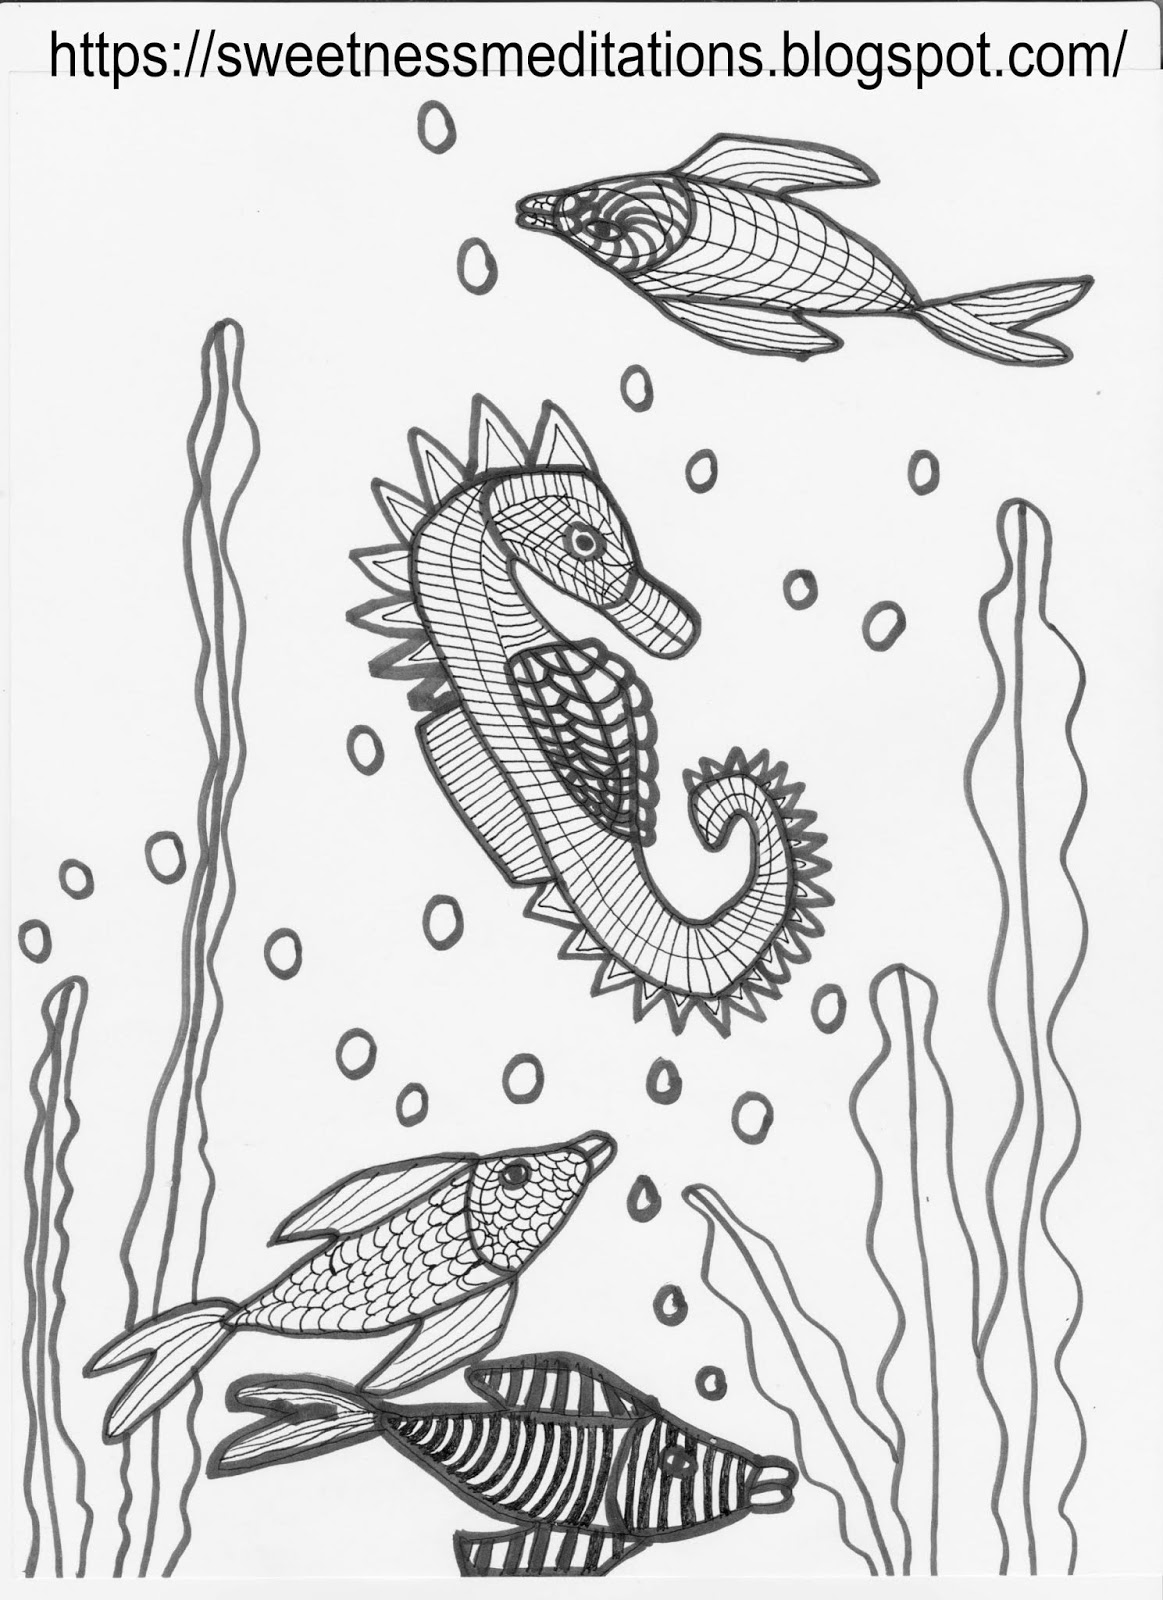 Sweetness Meditations: Free Coloring Pages of Seahorses